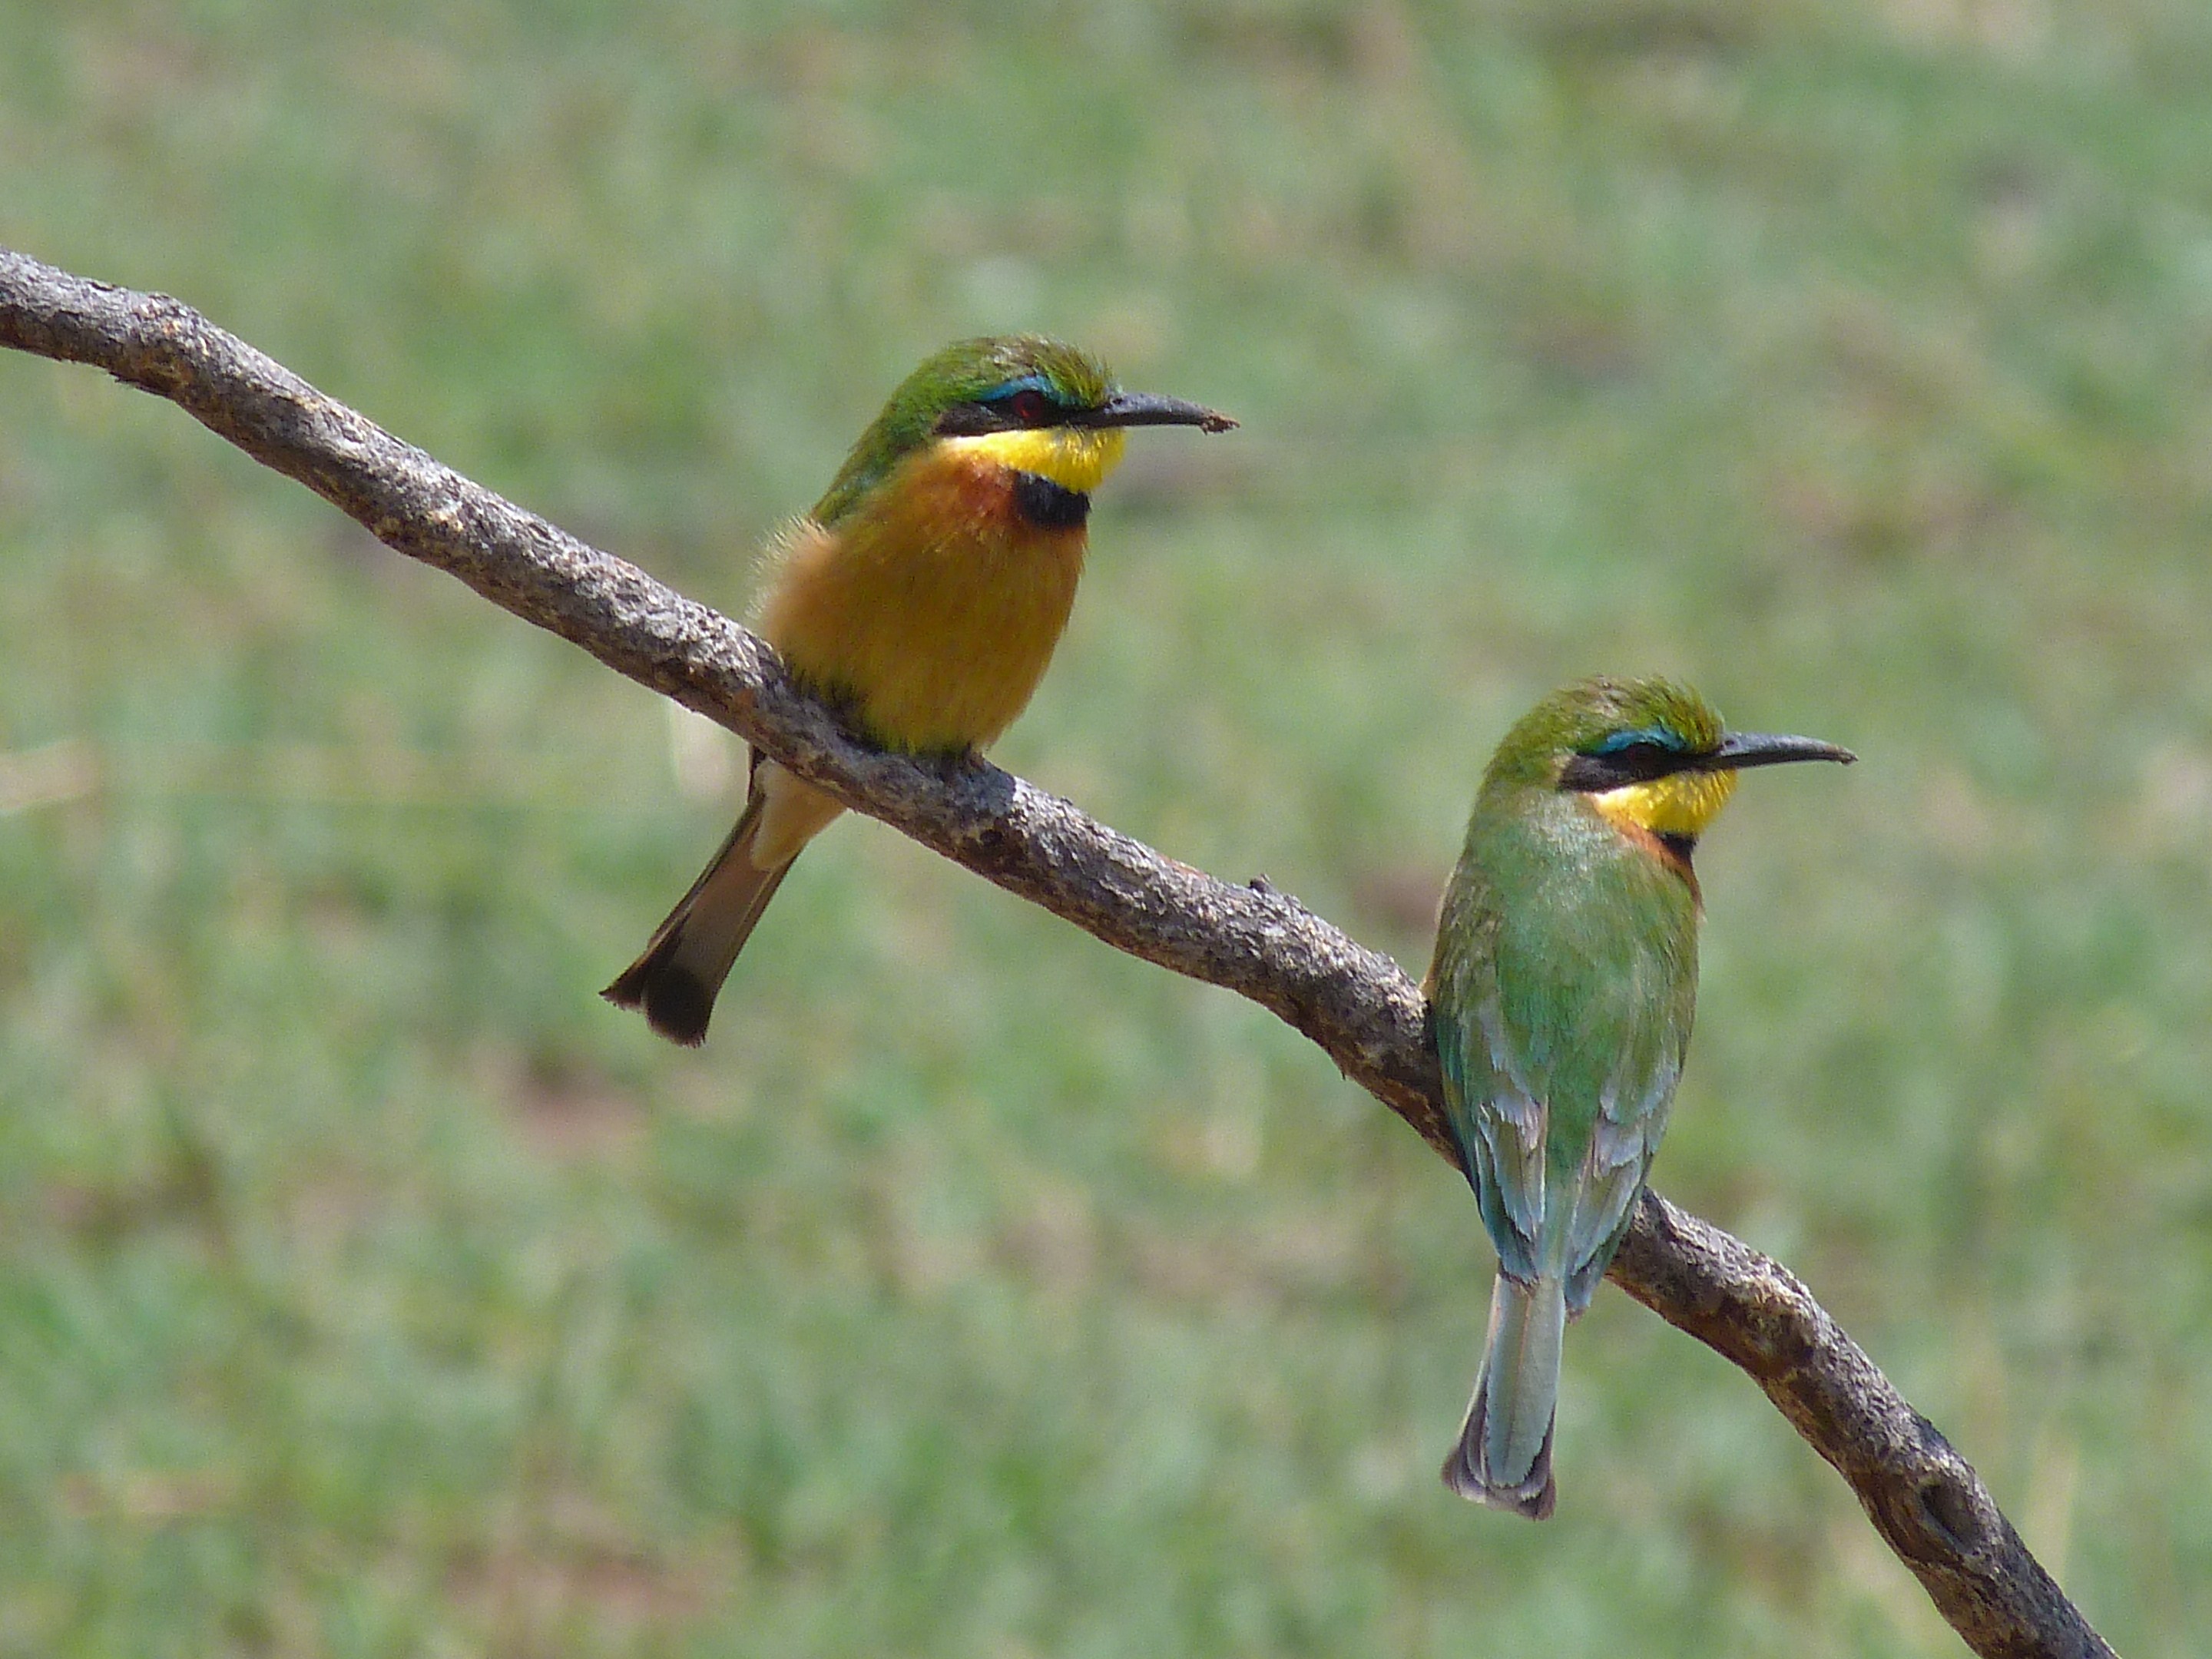 Image: Little Bee-eaters (Merops pusillus) are a common sight in Tanzanian National Parks